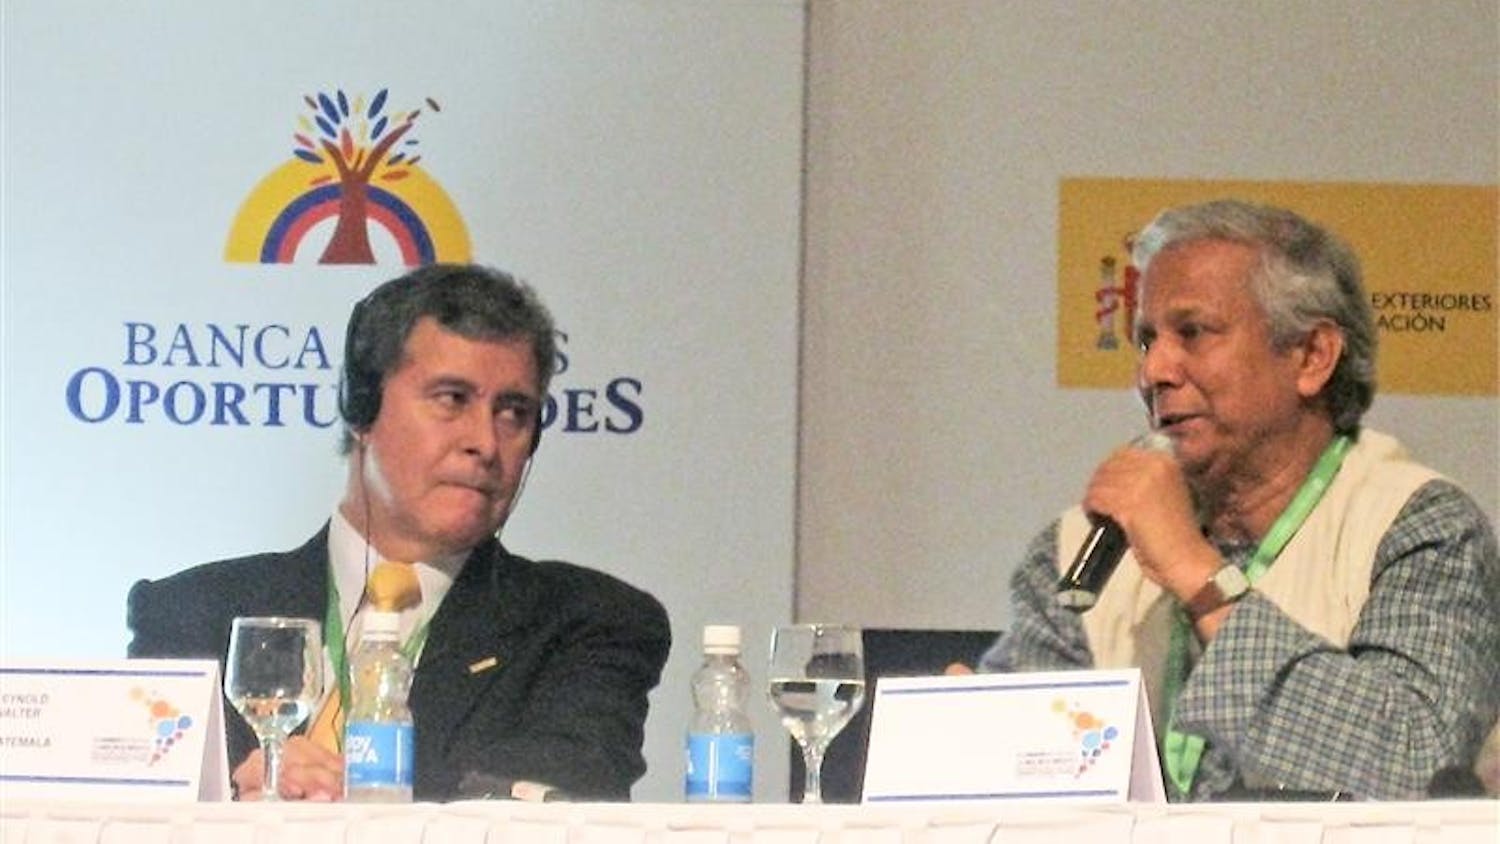 Reynold Walter, executive director of FAFIDESS, a non-governmental organization in Guatemala, listens attentively as Professor Muhammad Yunus, founder and director of Grameen Bank, discusses the importance of financial literacy at all socioeconomic levels Tuesday at the Latin American-Caribbean Regional Microcredit Summit in Cartagena, Colombia.